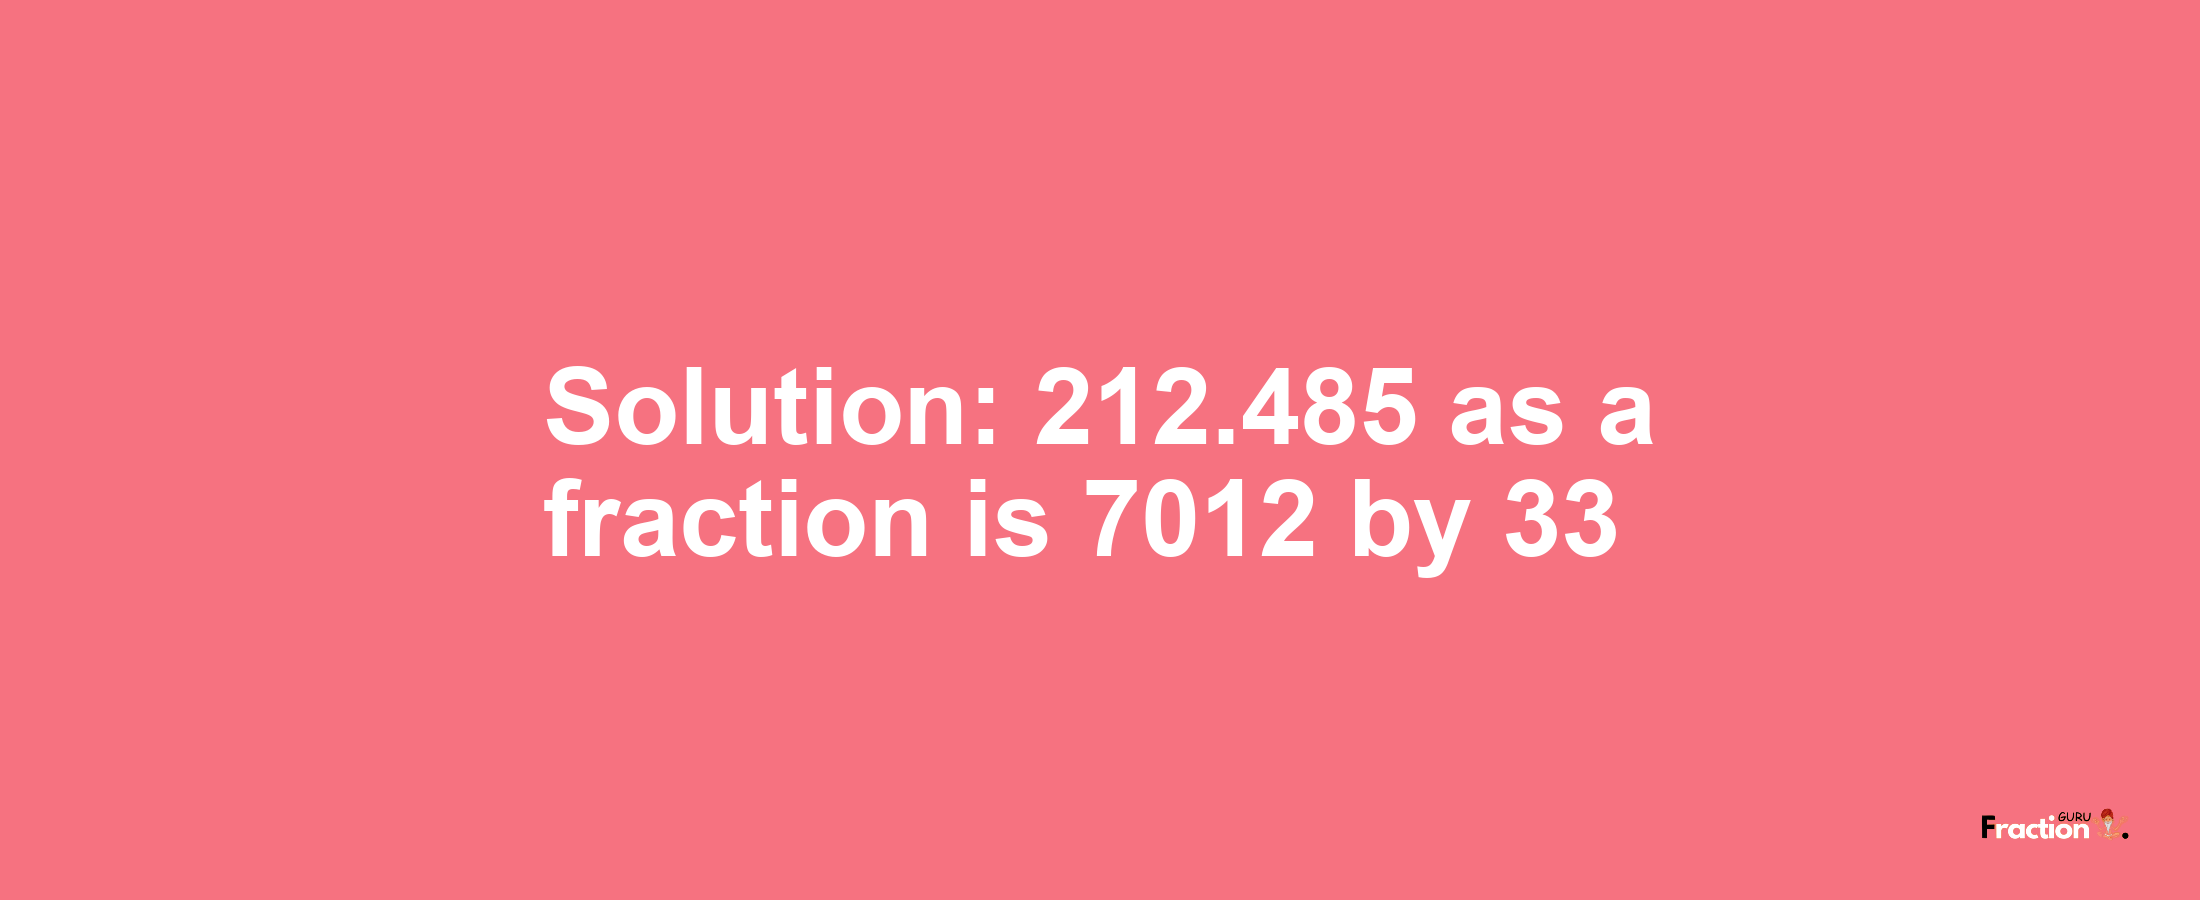 Solution:212.485 as a fraction is 7012/33